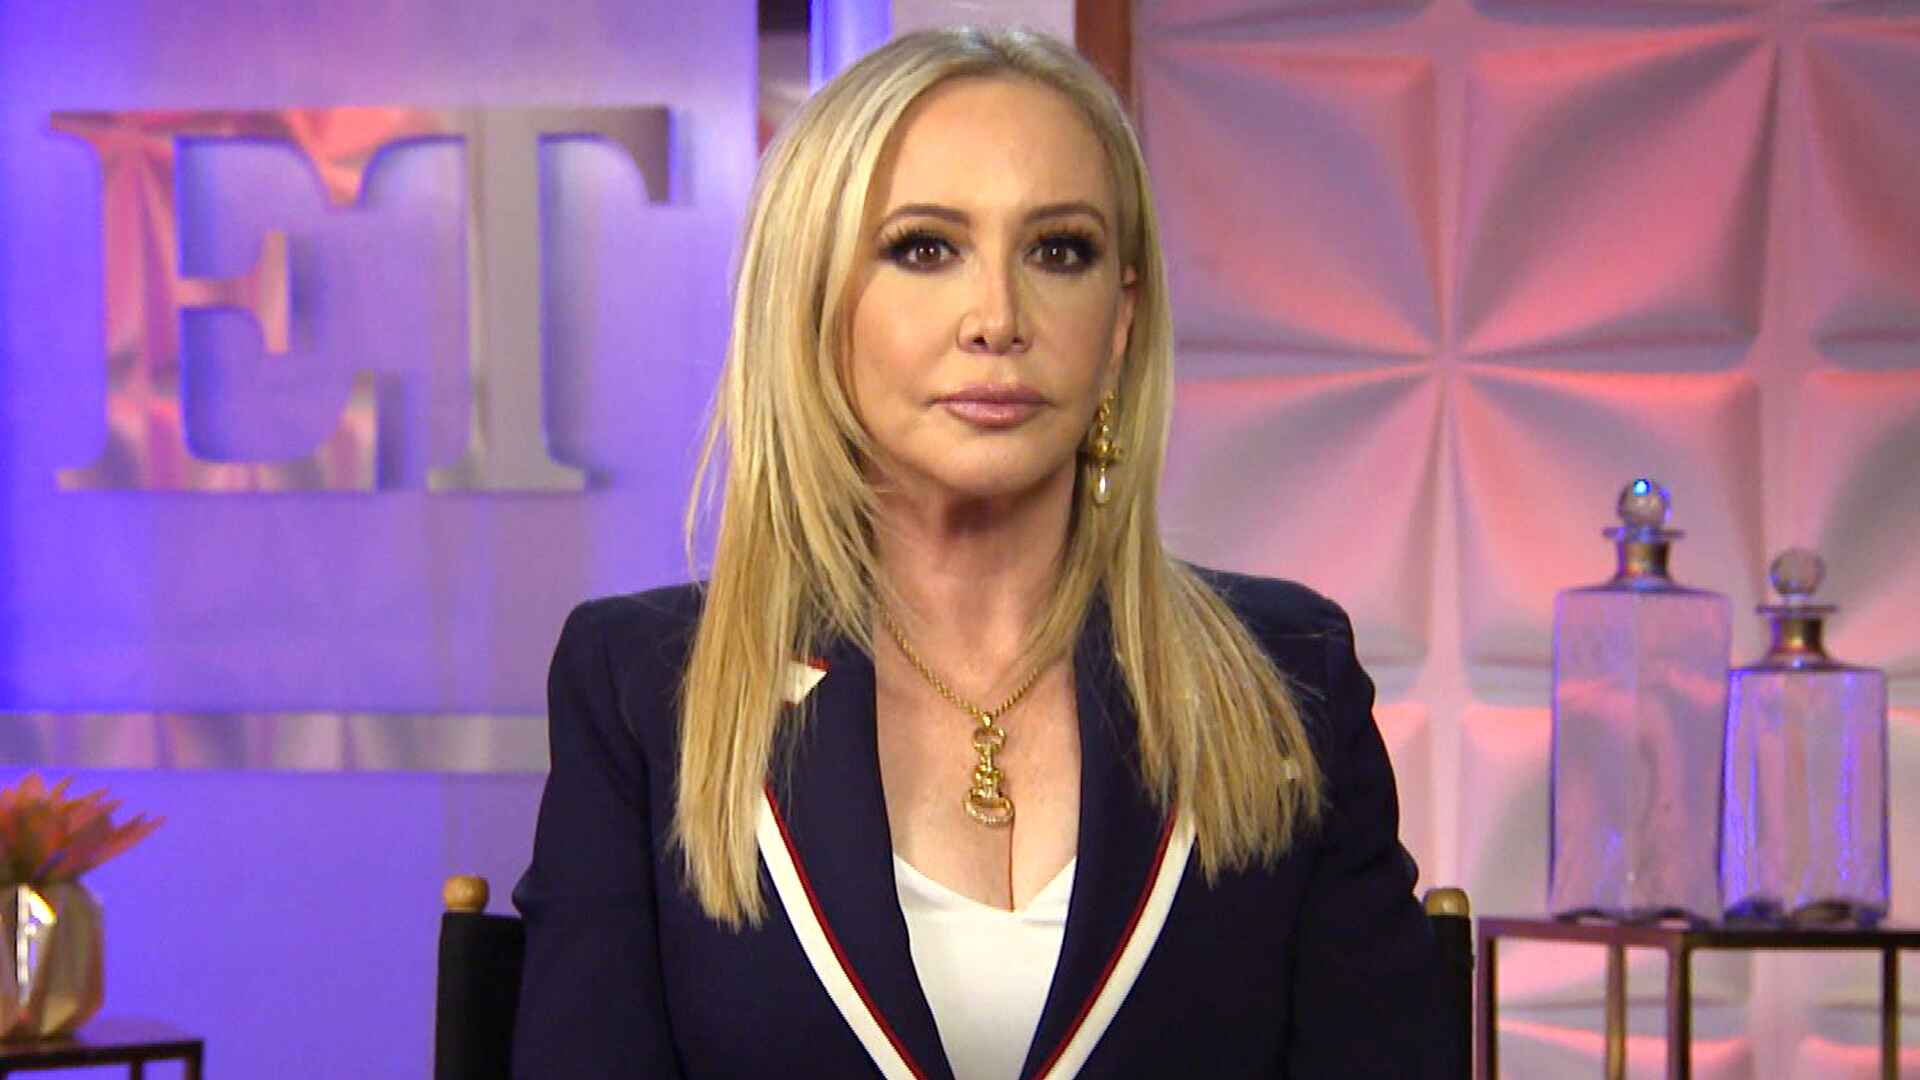 shannon-beador-takes-responsibility-and-offers-to-pay-for-damaged-property-following-dui